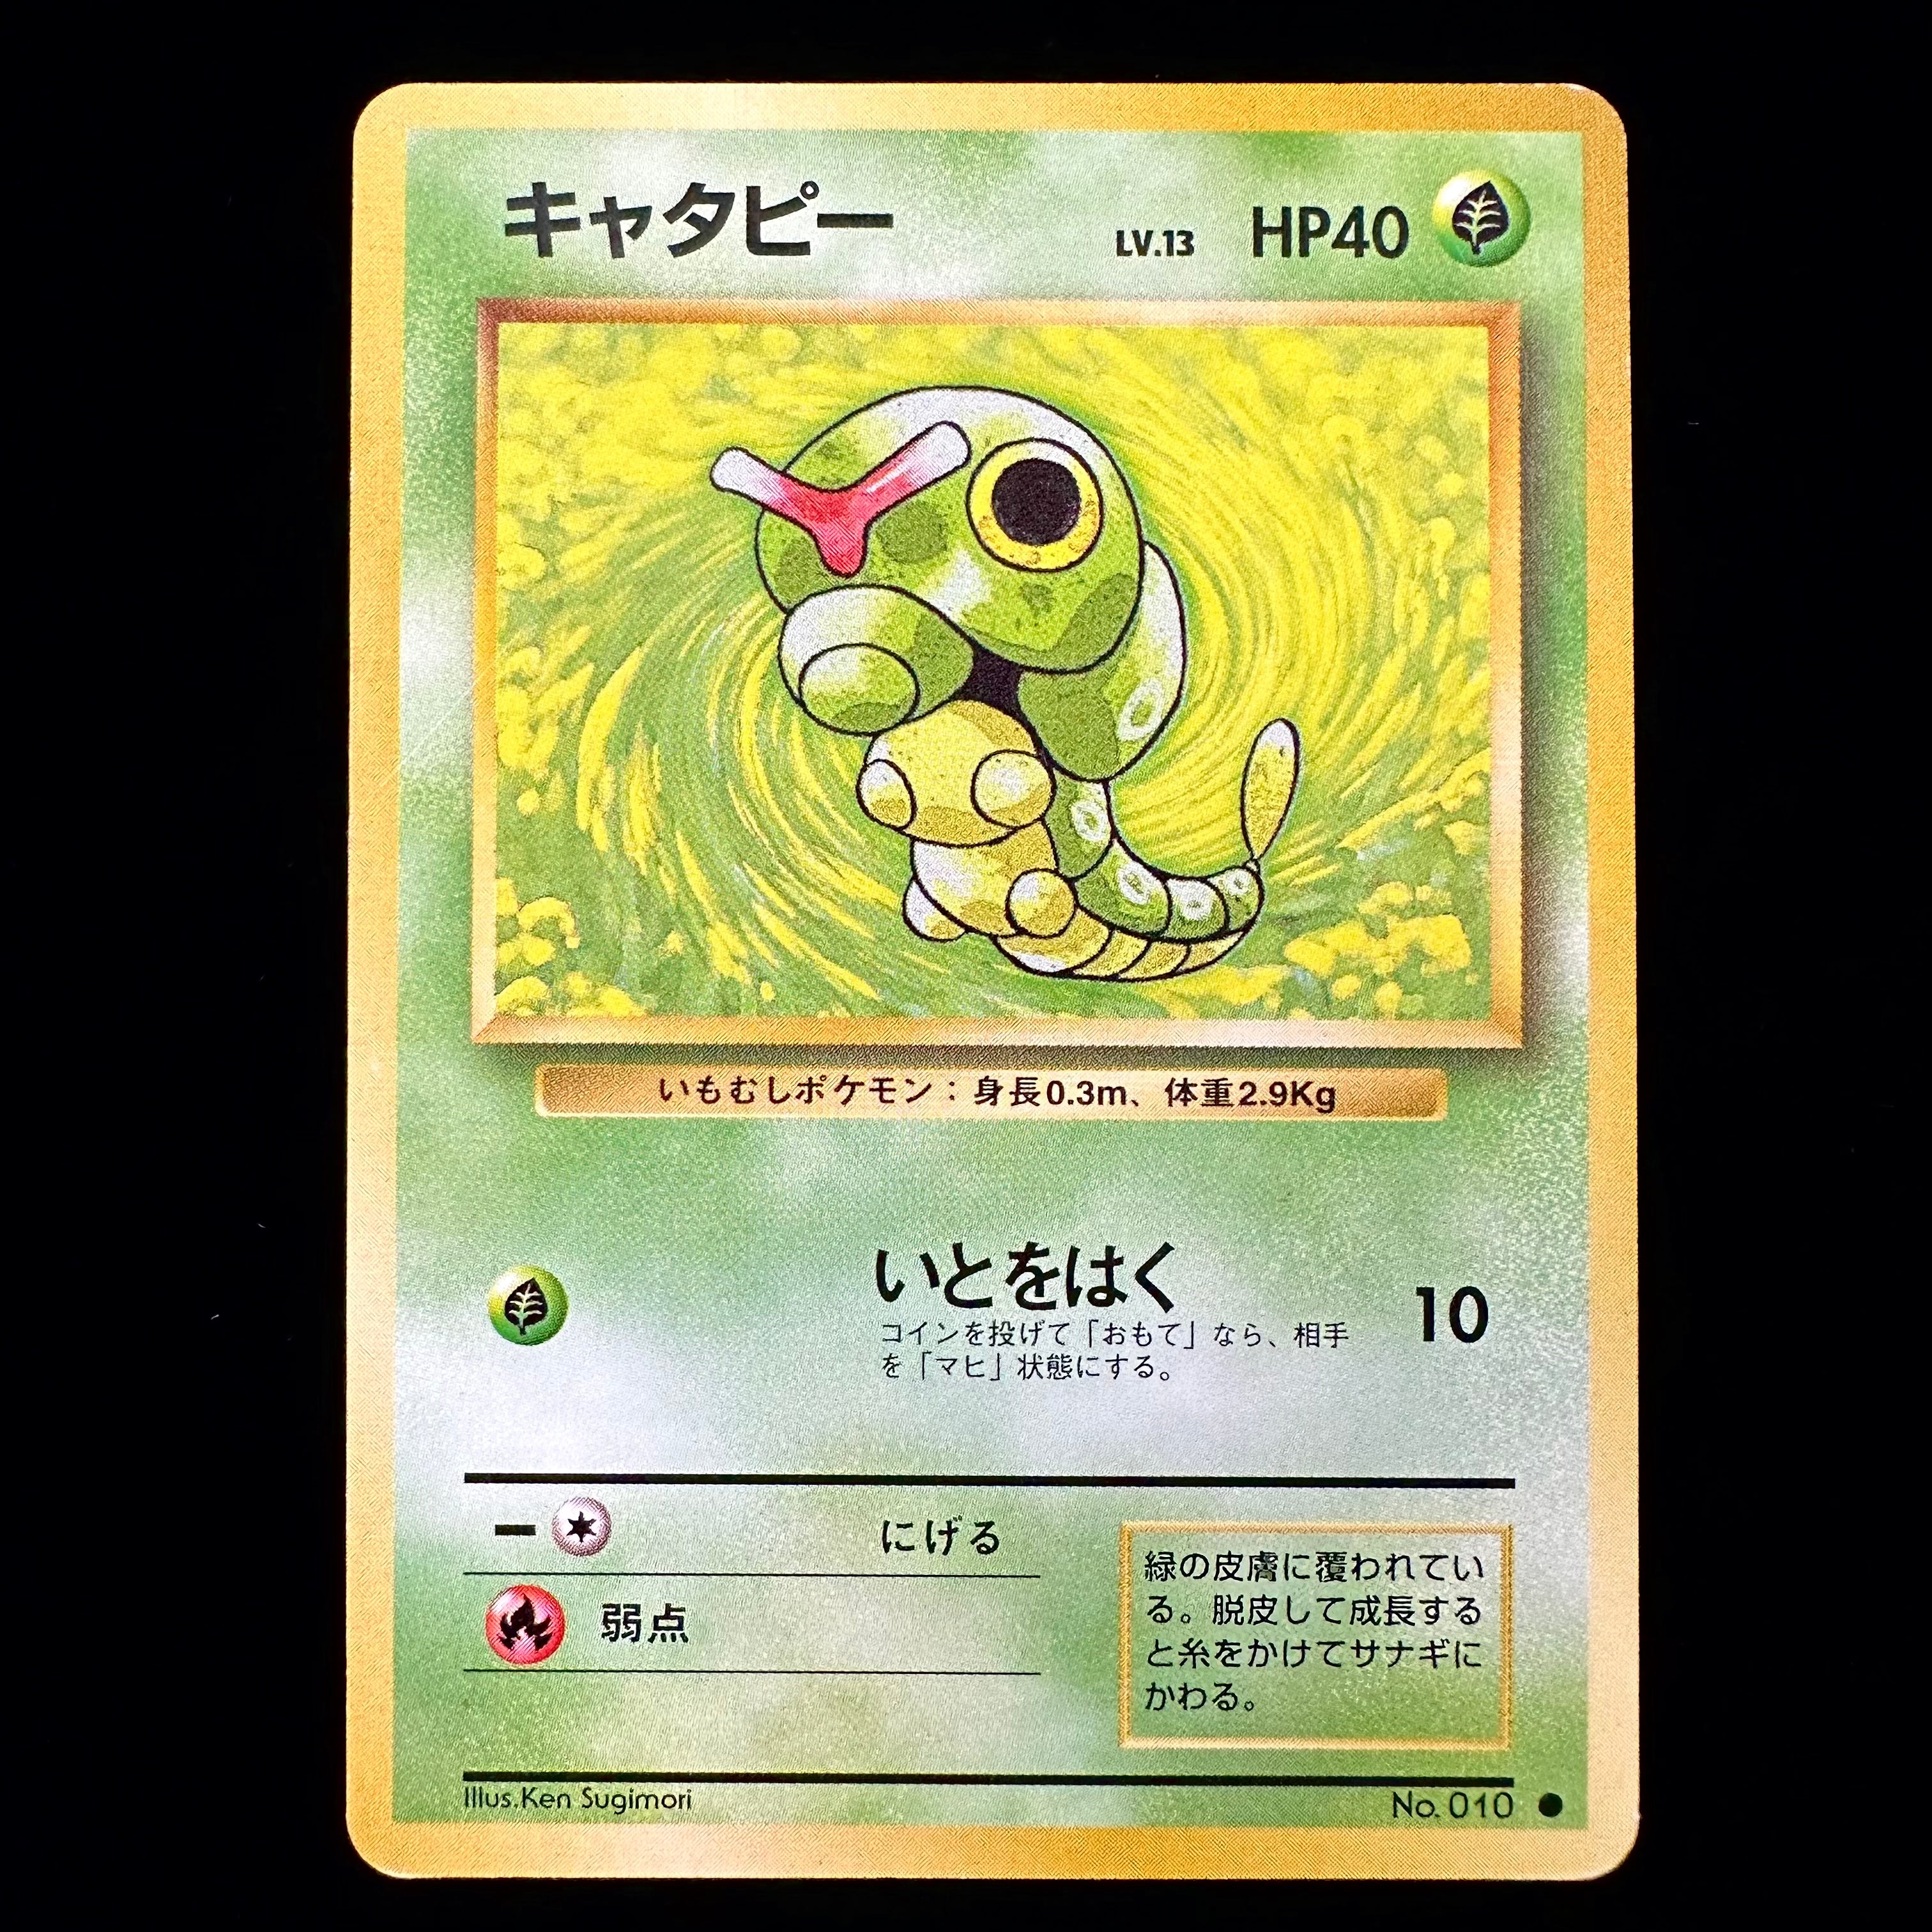 POCKET MONSTERS CARD GAME Caterpie BASE SET